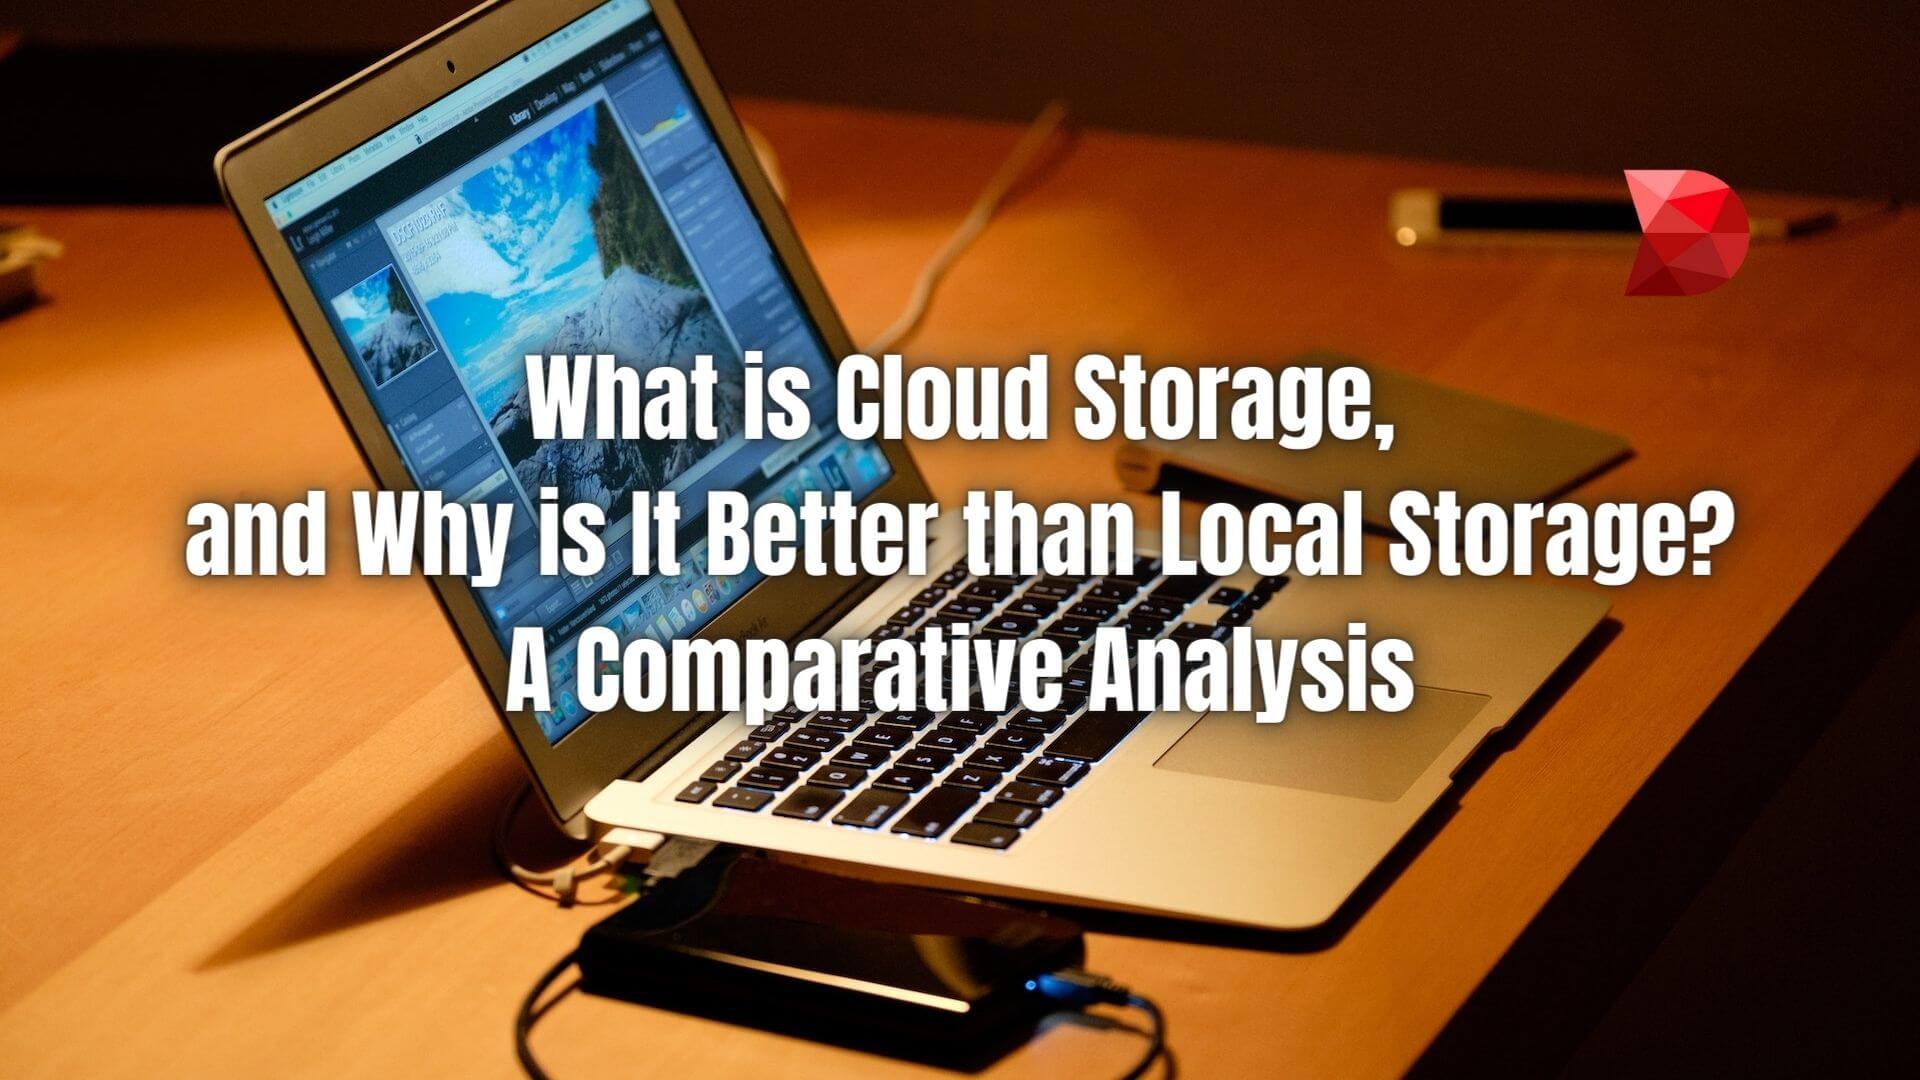 Cloud storage vs. local storage, learn why the rise of cloud storage has transformed the way we store, manage, and access data.